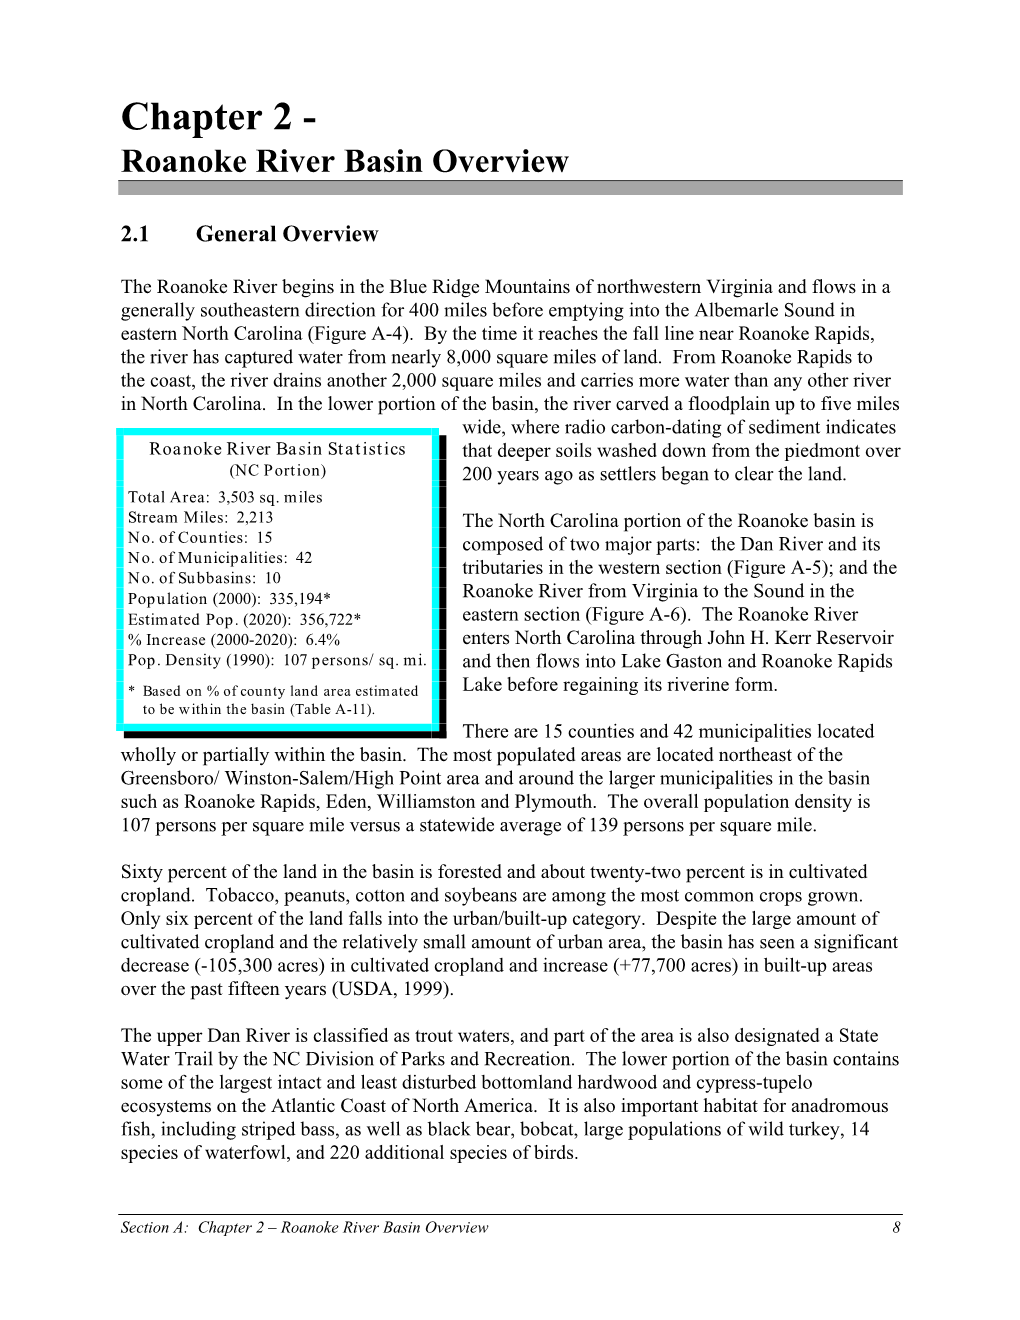 Chapter 2 – Roanoke River Basin Overview 8 Figure A-4 General Map of the Entire Roanoke River Basin